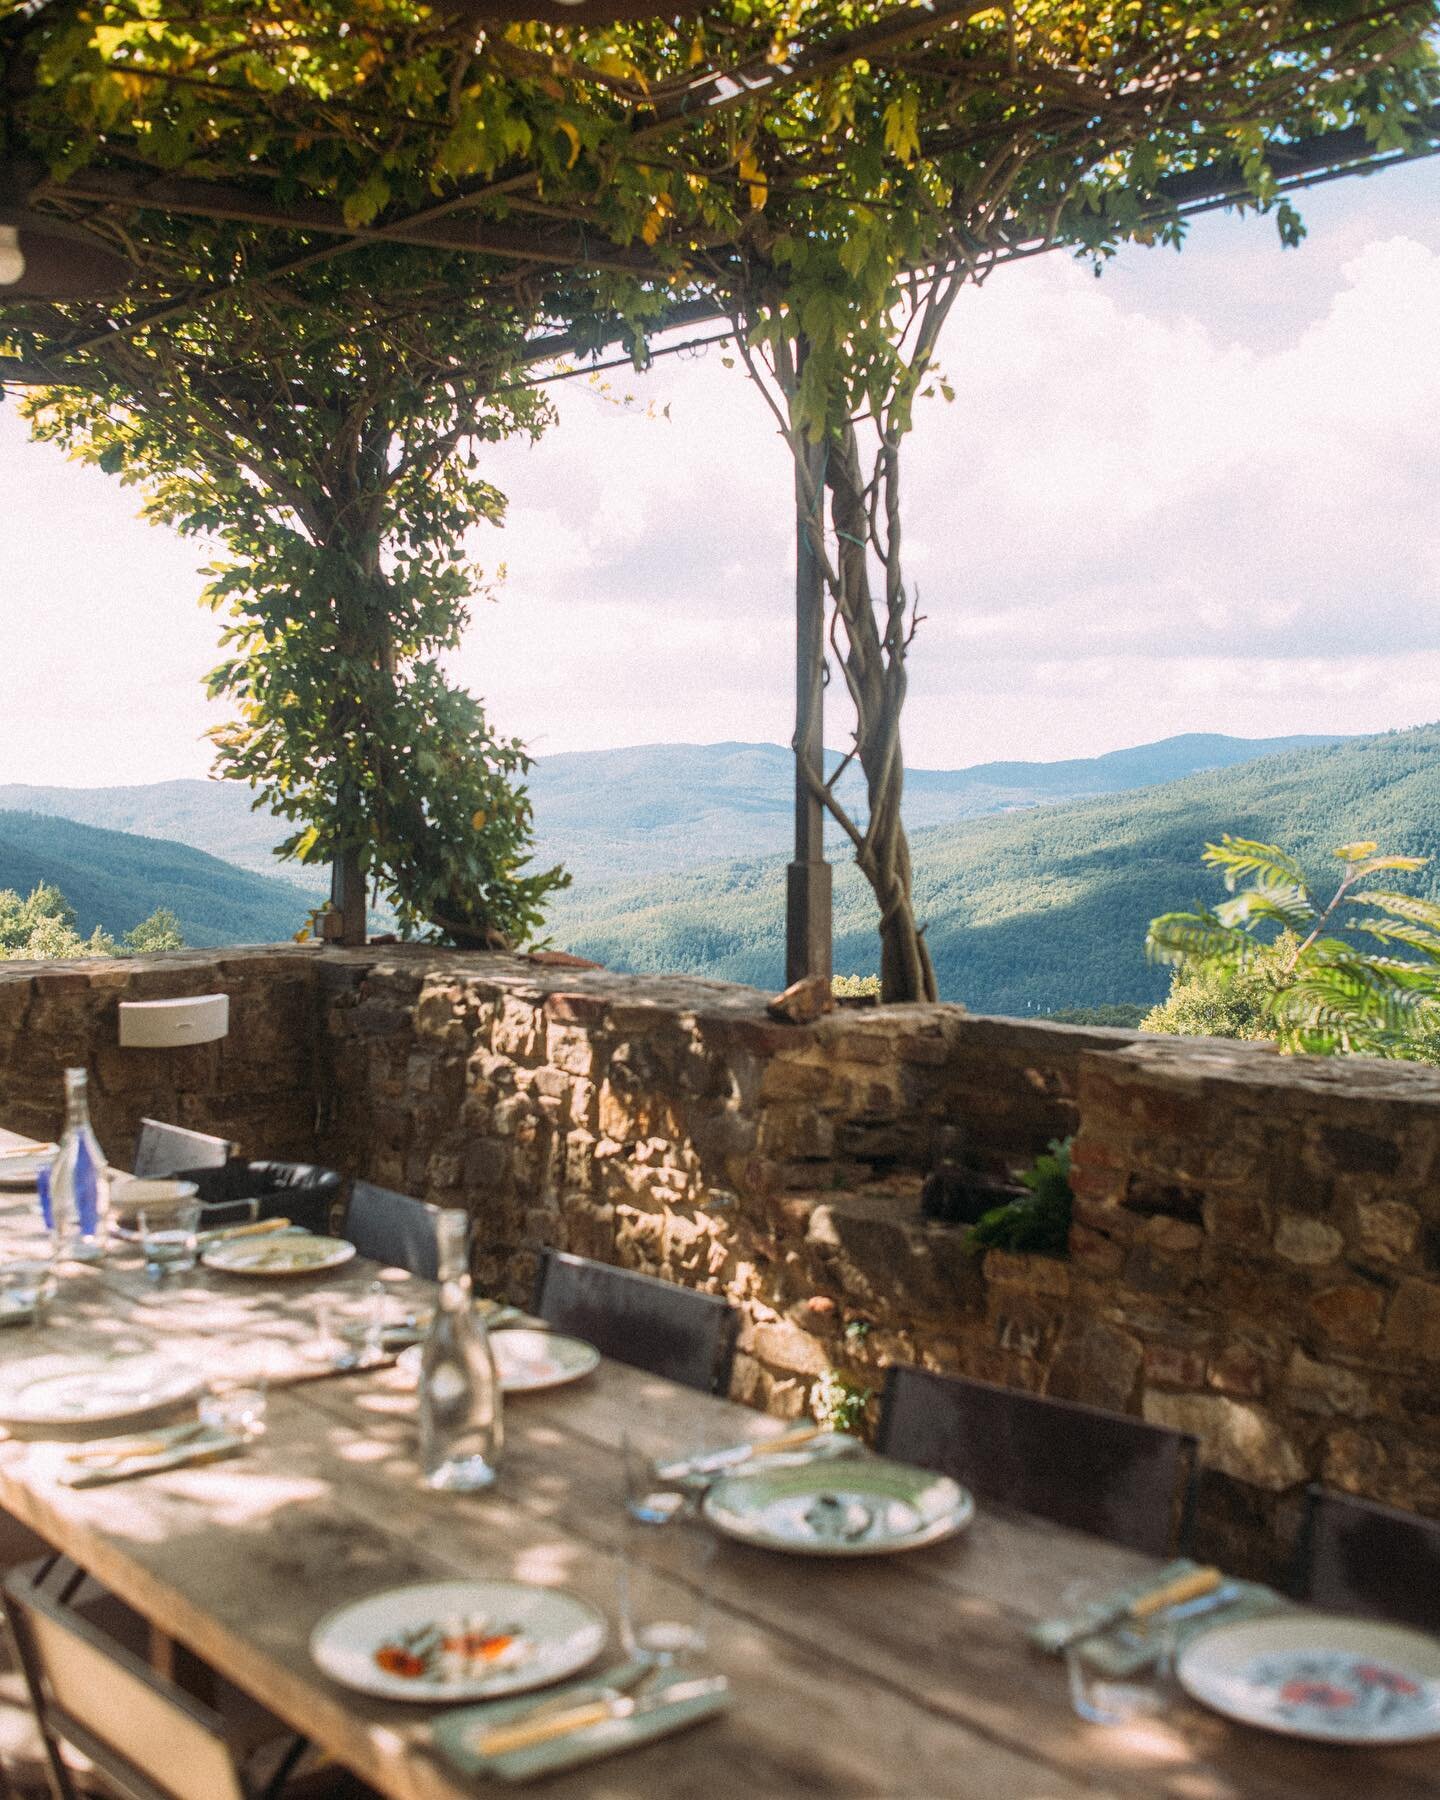 Tuscany in Autumn. Seed to Plate retreat with @meadowsweetretreat.

Photos by @joyaberrow